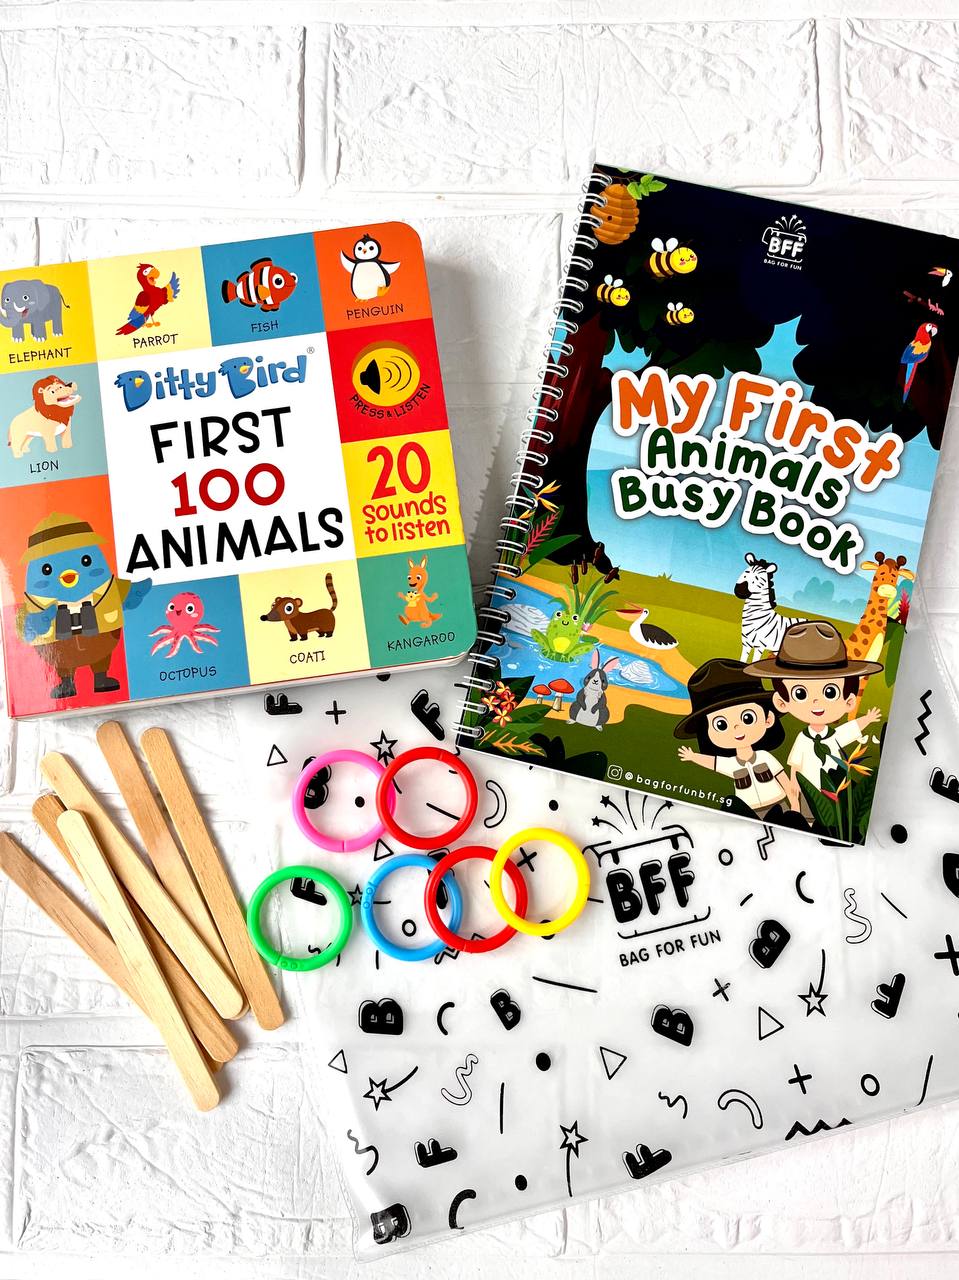 My First Animals Busy Book Bundle